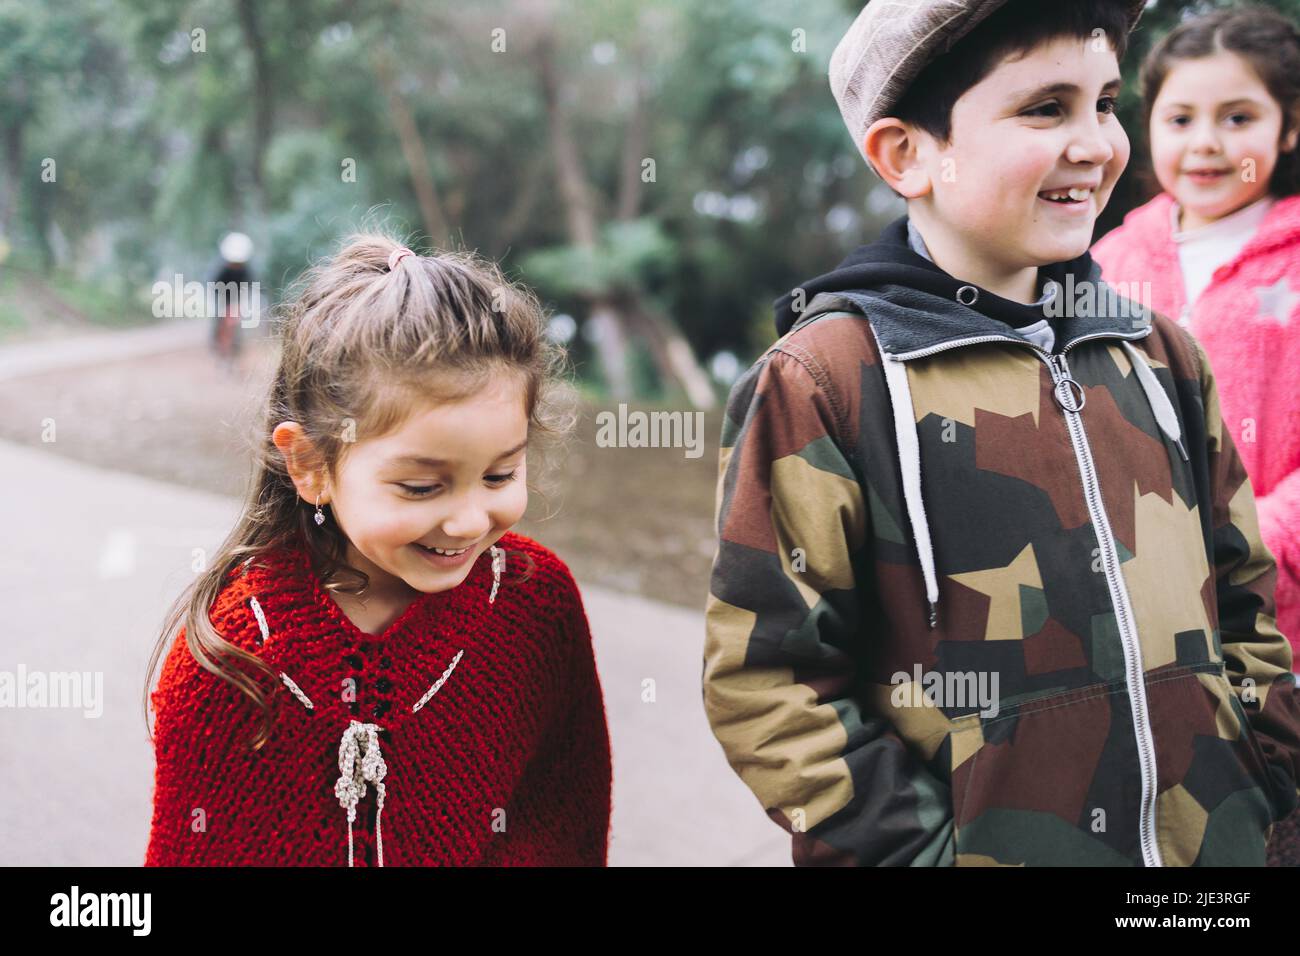 Three kids, tow girls and one boy, walking and talking in a park road.  Stock Photo